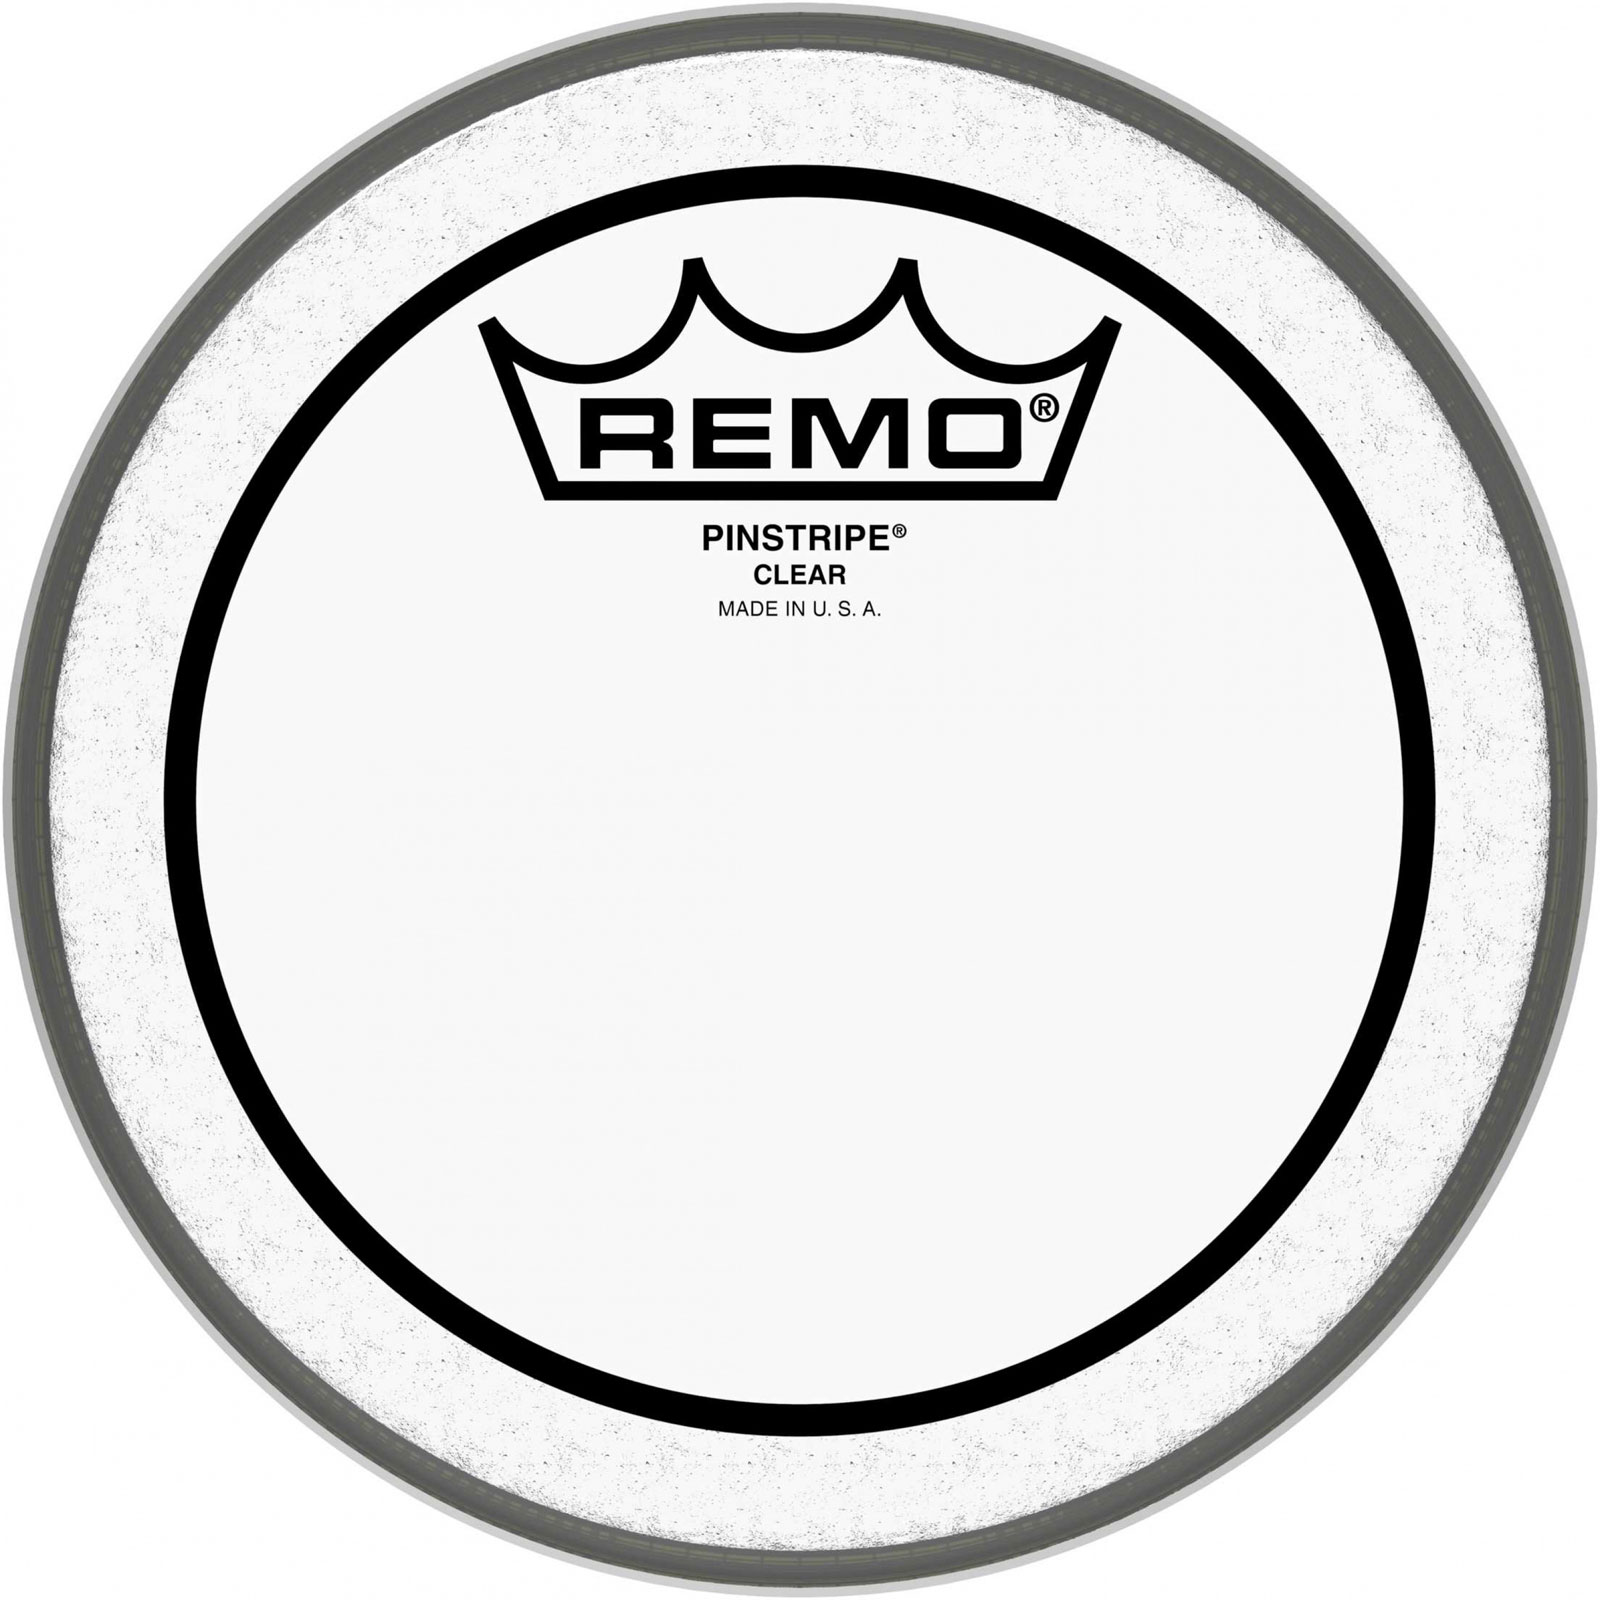 REMO PS-0306-00 - PINSTRIPE CLEAR 6